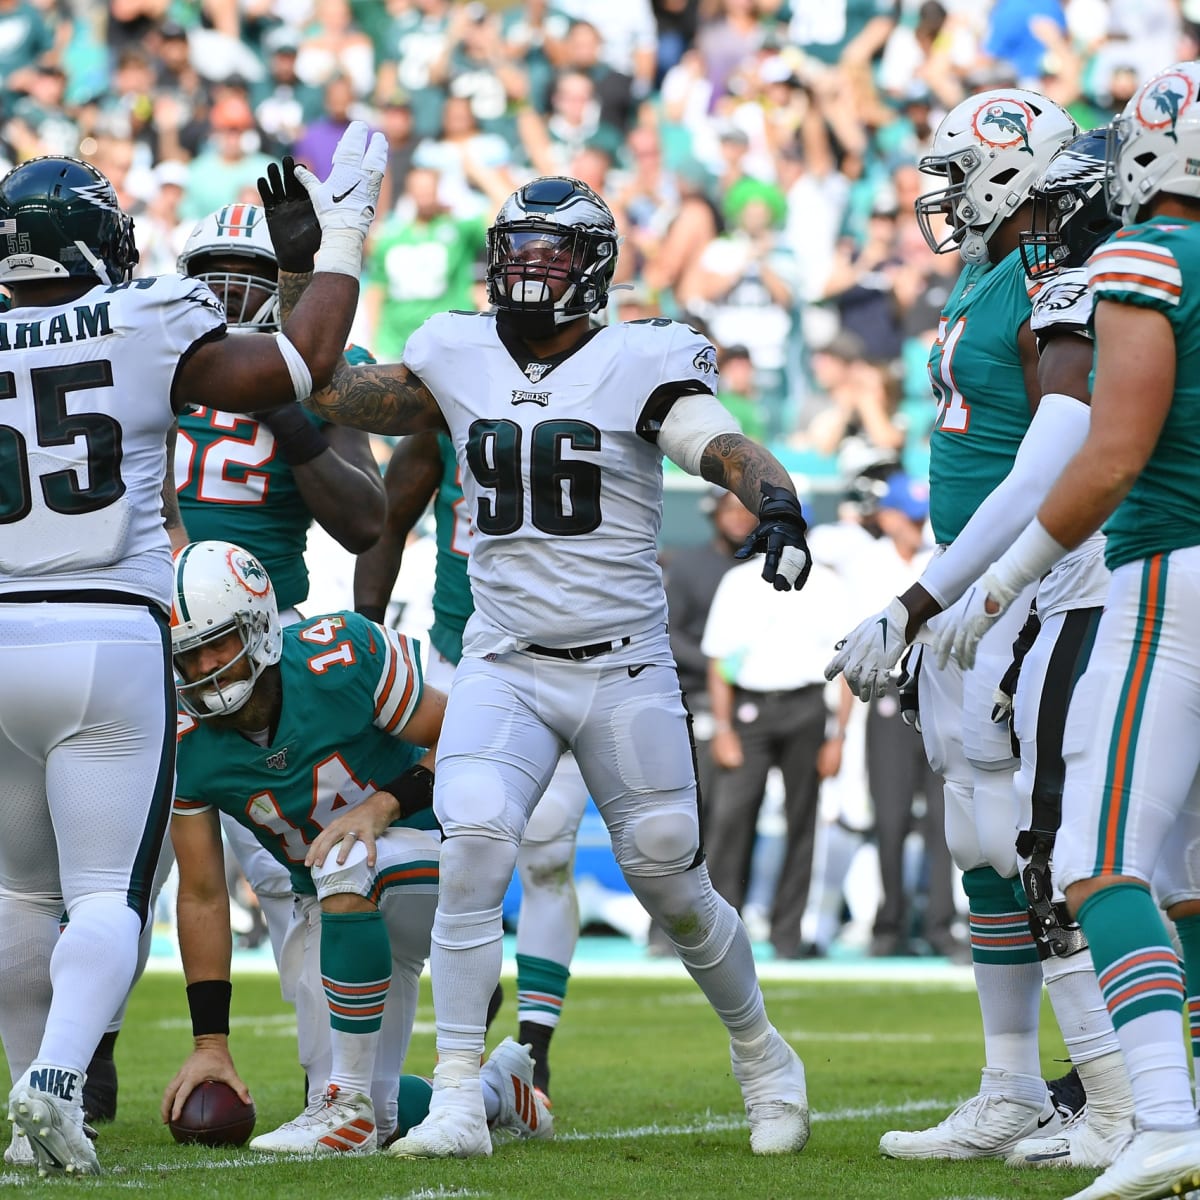 Eagles Defensive Line given lofty PFF rankings. Too much, too soon?